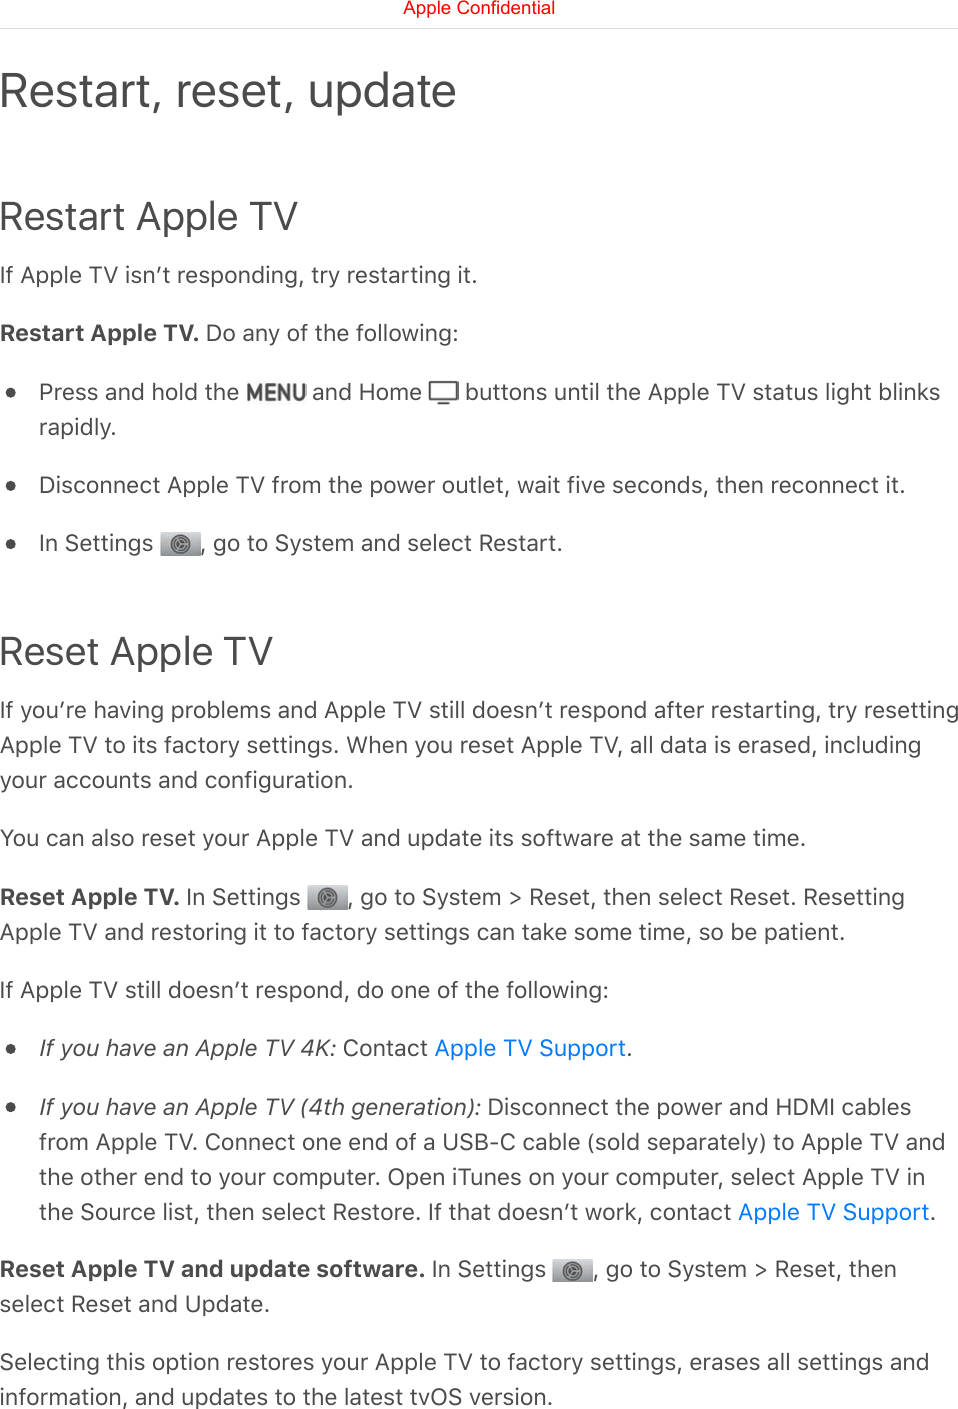 Restart Apple TVIf Apple TV isnʼt responding, try restarting it.Restart Apple TV. Do any of the following:Press and hold the   and Home   buttons until the Apple TV status light blinksrapidly.Disconnect Apple TV from the power outlet, wait five seconds, then reconnect it.In Settings  , go to System and select Restart.Reset Apple TVIf youʼre having problems and Apple TV still doesnʼt respond after restarting, try resettingApple TV to its factory settings. When you reset Apple TV, all data is erased, includingyour accounts and configuration.You can also reset your Apple TV and update its software at the same time.Reset Apple TV. In Settings  , go to System &gt; Reset, then select Reset. ResettingApple TV and restoring it to factory settings can take some time, so be patient.If Apple TV still doesnʼt respond, do one of the following:If you have an Apple TV 4K: Contact  .If you have an Apple TV (4th generation): Disconnect the power and HDMI cablesfrom Apple TV. Connect one end of a USB-C cable (sold separately) to Apple TV andthe other end to your computer. Open iTunes on your computer, select Apple TV inthe Source list, then select Restore. If that doesnʼt work, contact  .Reset Apple TV and update software. In Settings  , go to System &gt; Reset, thenselect Reset and Update.Selecting this option restores your Apple TV to factory settings, erases all settings andinformation, and updates to the latest tvOS version.Restart, reset, updateApple TV SupportApple TV SupportApple Confidential